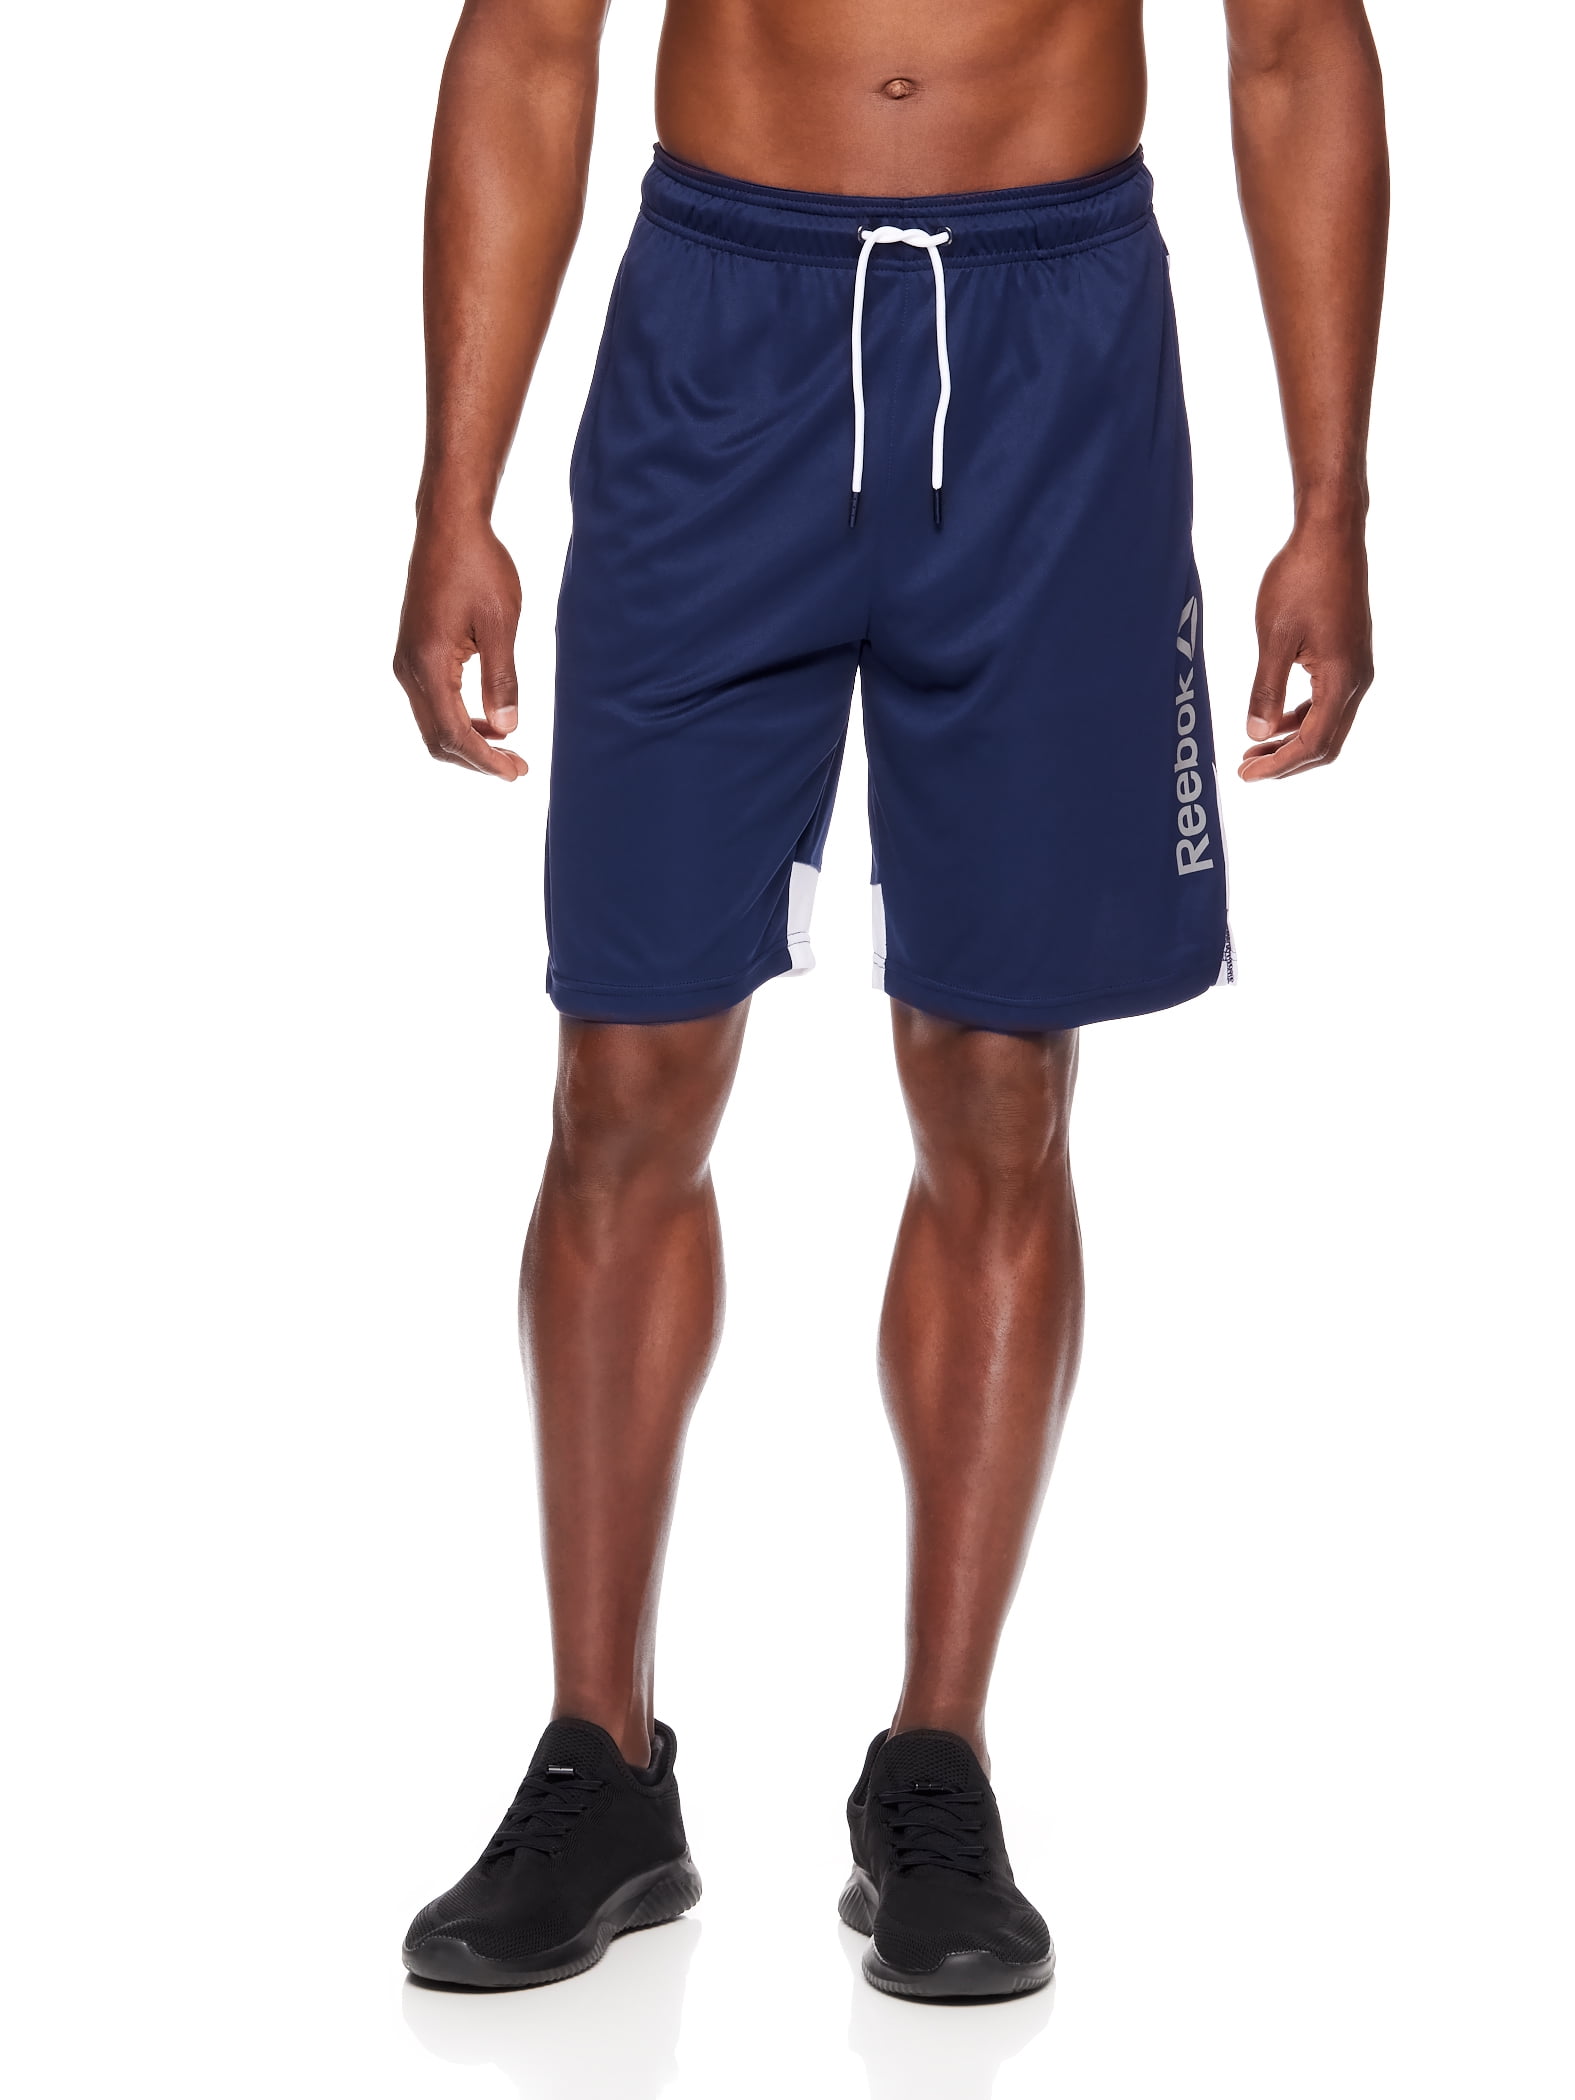 Men's and Big Men's Performance Knit Training 9" Shorts, up to Size 3XL - Walmart.com